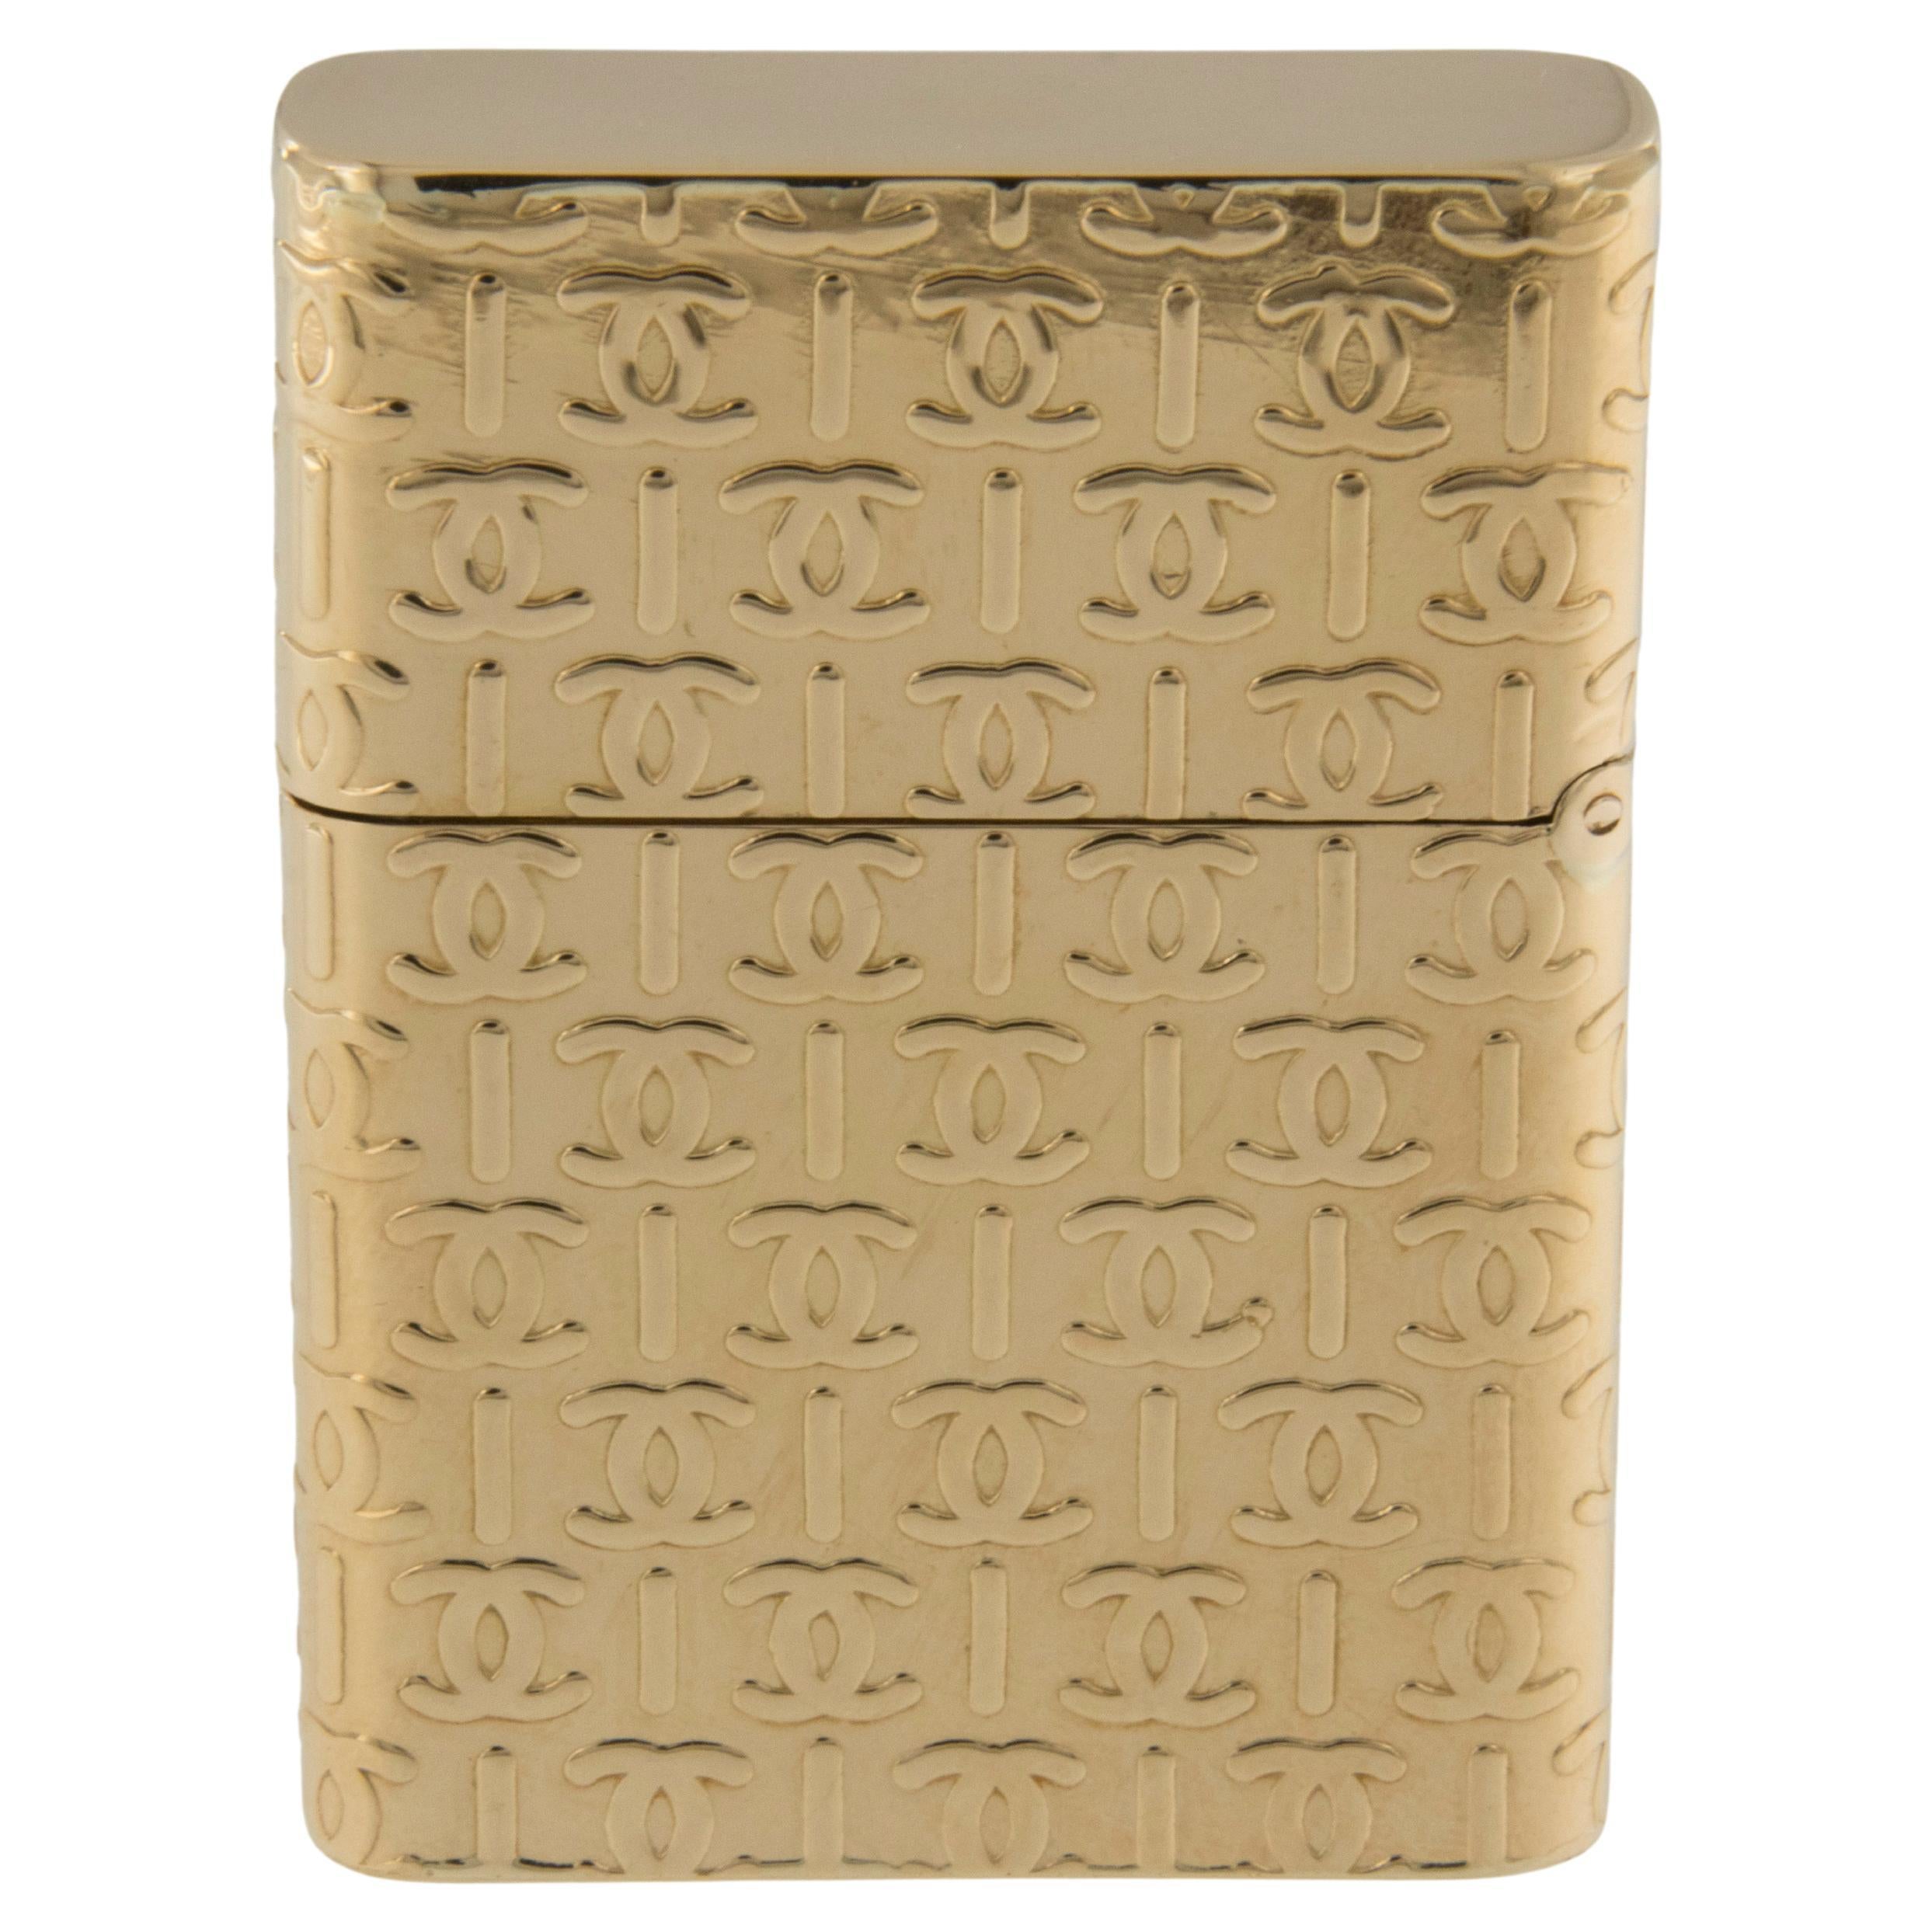 Handsome never used 18 karat yellow gold Cartier cigar lighter for the ever stylish gentleman. Iconic double CC design and in perfect working order. Complimentary signature wrapping and presentation box included. Over an ounce of 18 karat gold!